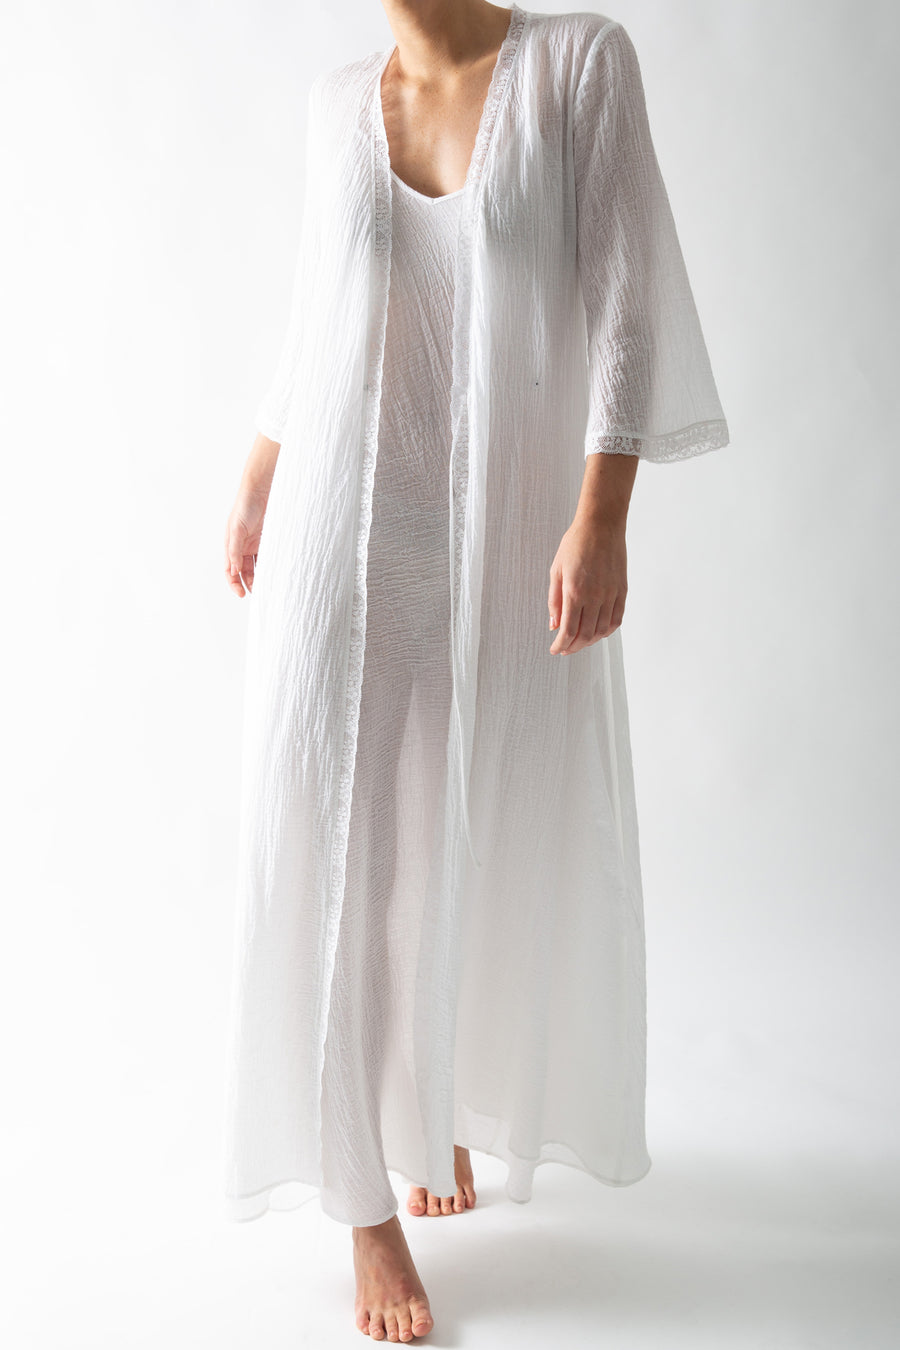 This is a photo of a woman wearing a white cotton gauze rope with wrap closure. There is lace trim along the seams and she wears it open with a white slip dress underneath.